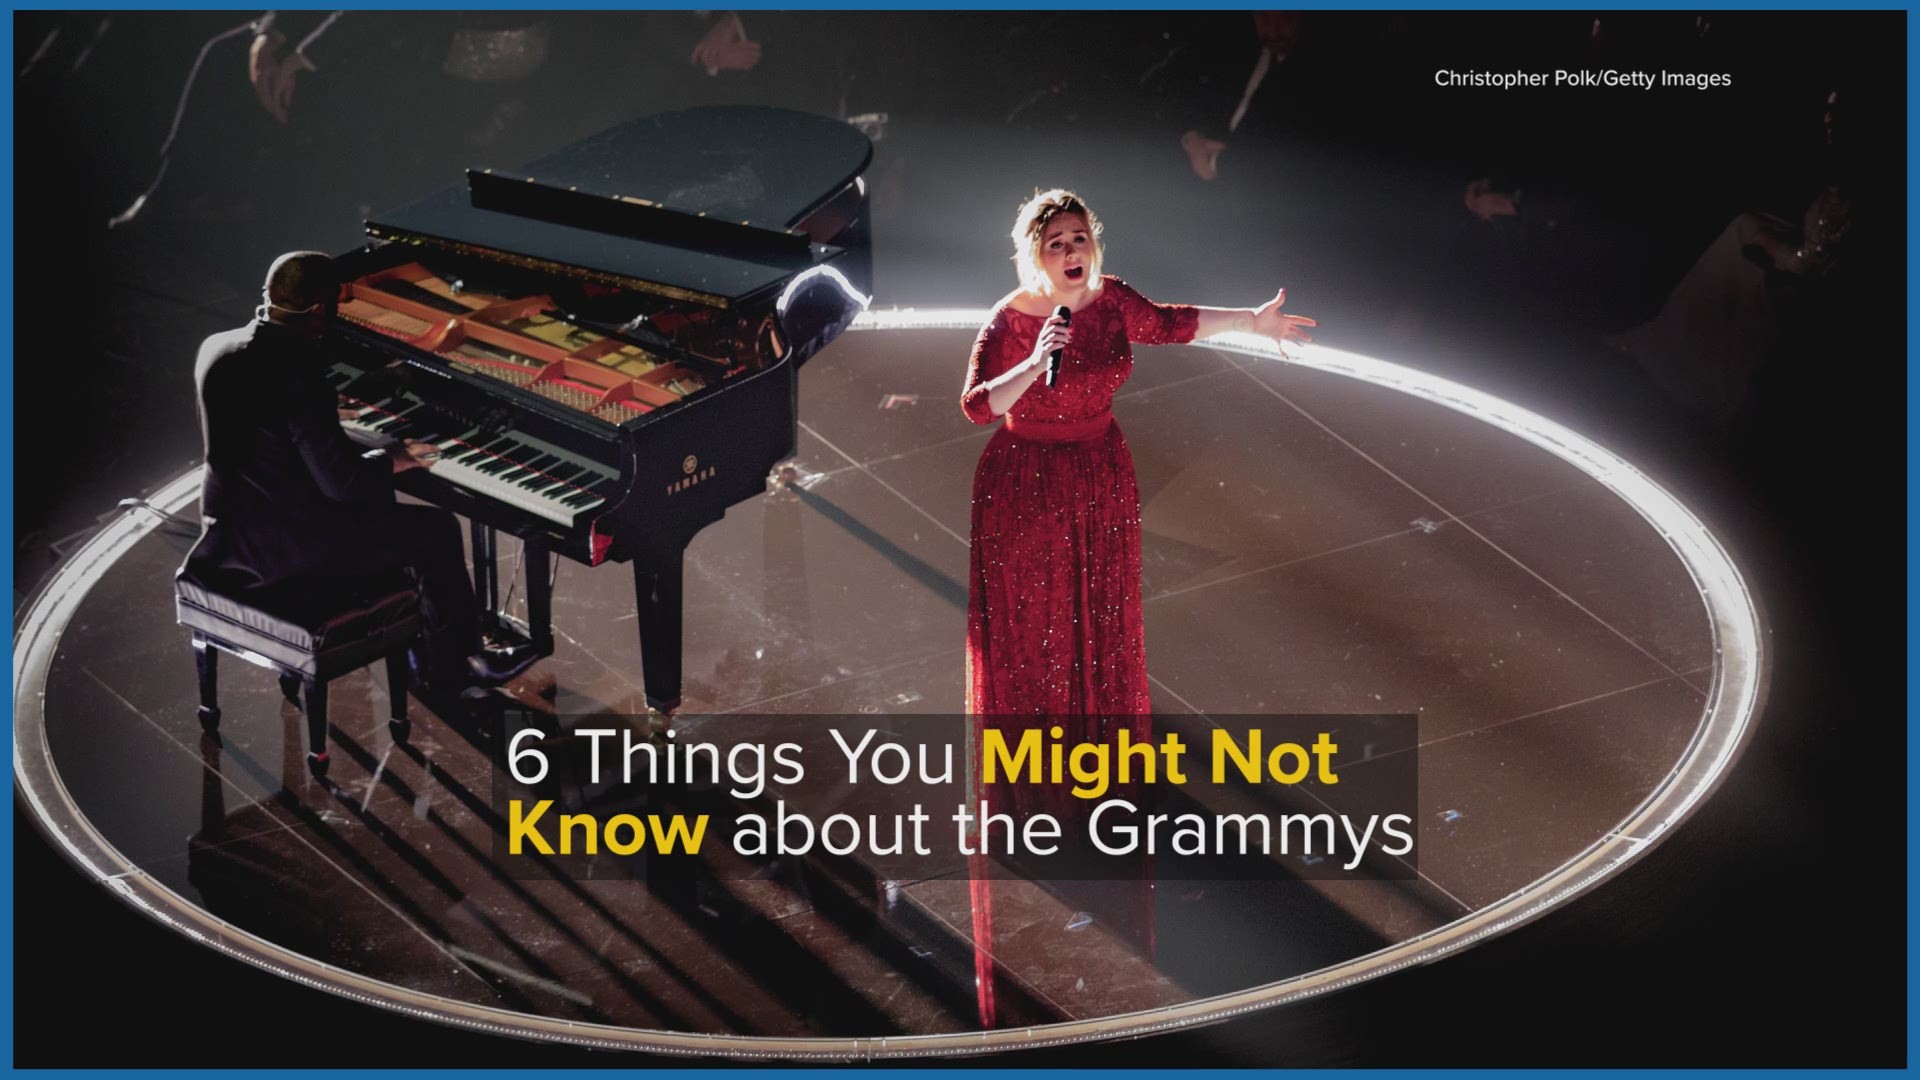 As the 61st Grammy Awards get closer, here are 6 things you might not know about music's biggest night.